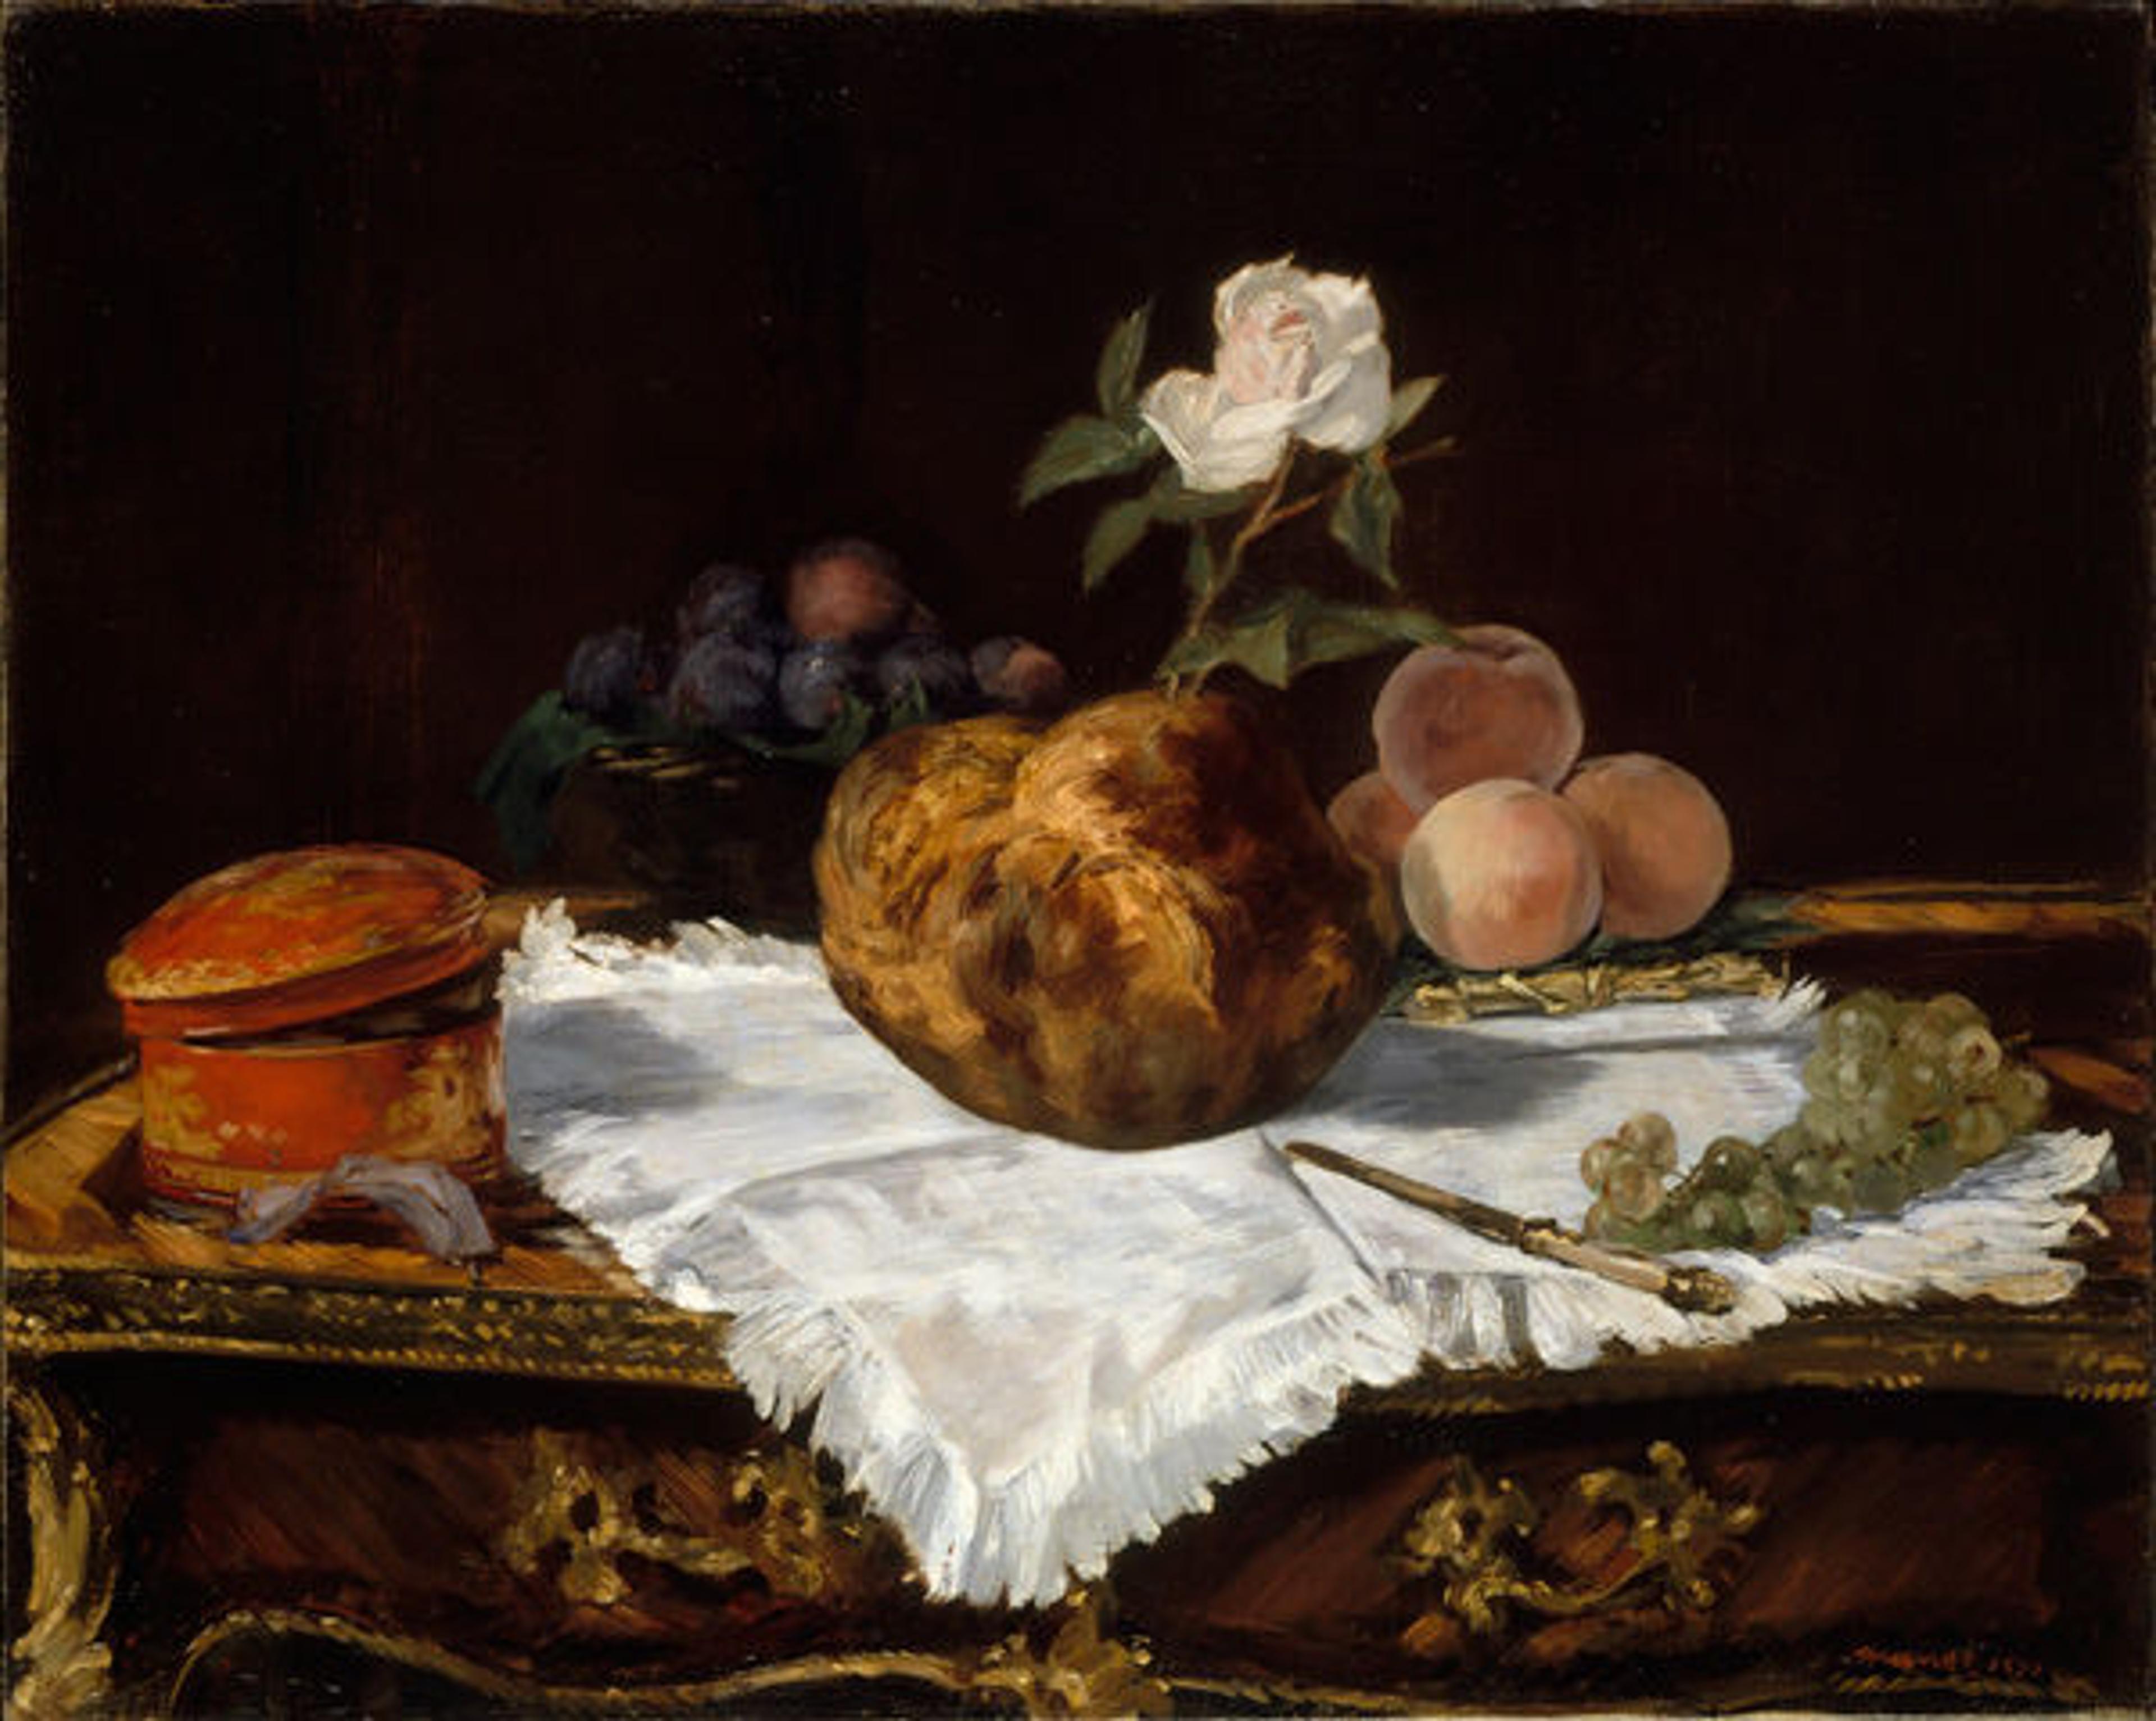 Édouard Manet (French, 1832–1883). The Brioche, 1870. Oil on canvas. The Metropolitan Museum of Art, New York, Partial and Promised Gift of an Anonymous Donor, 1991 (1991.287)